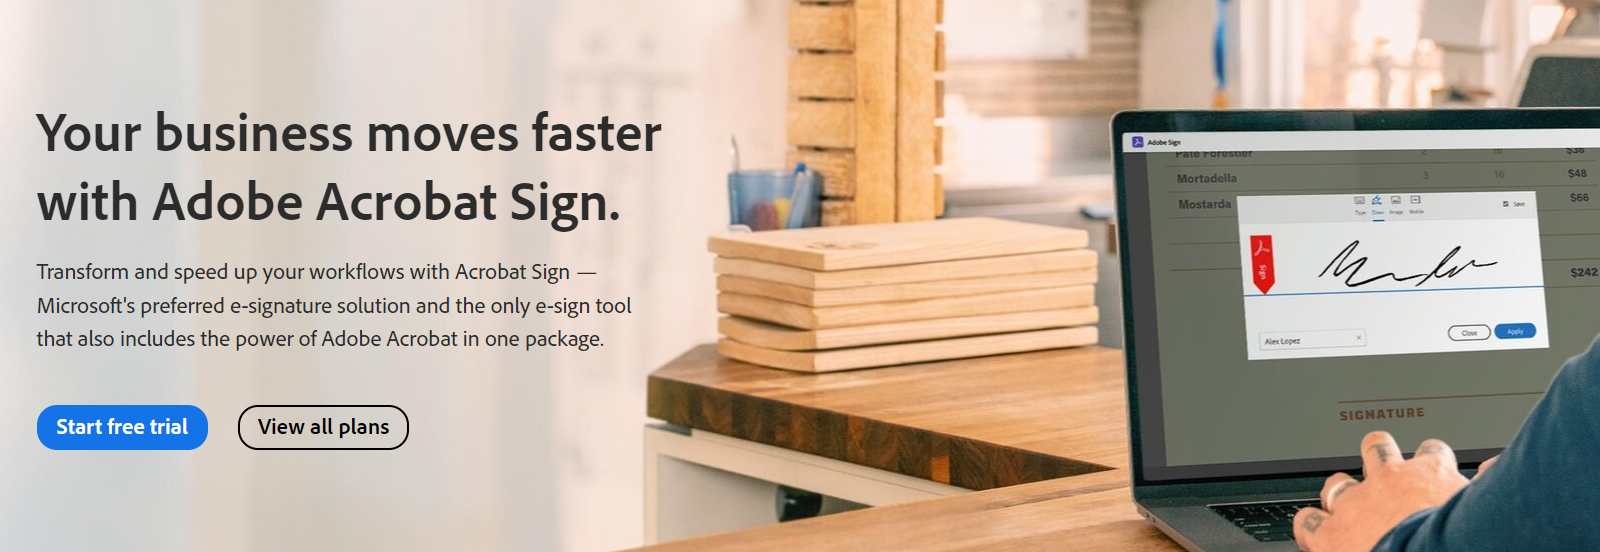 Adobe sign is an excellent marketing tool for businesses.